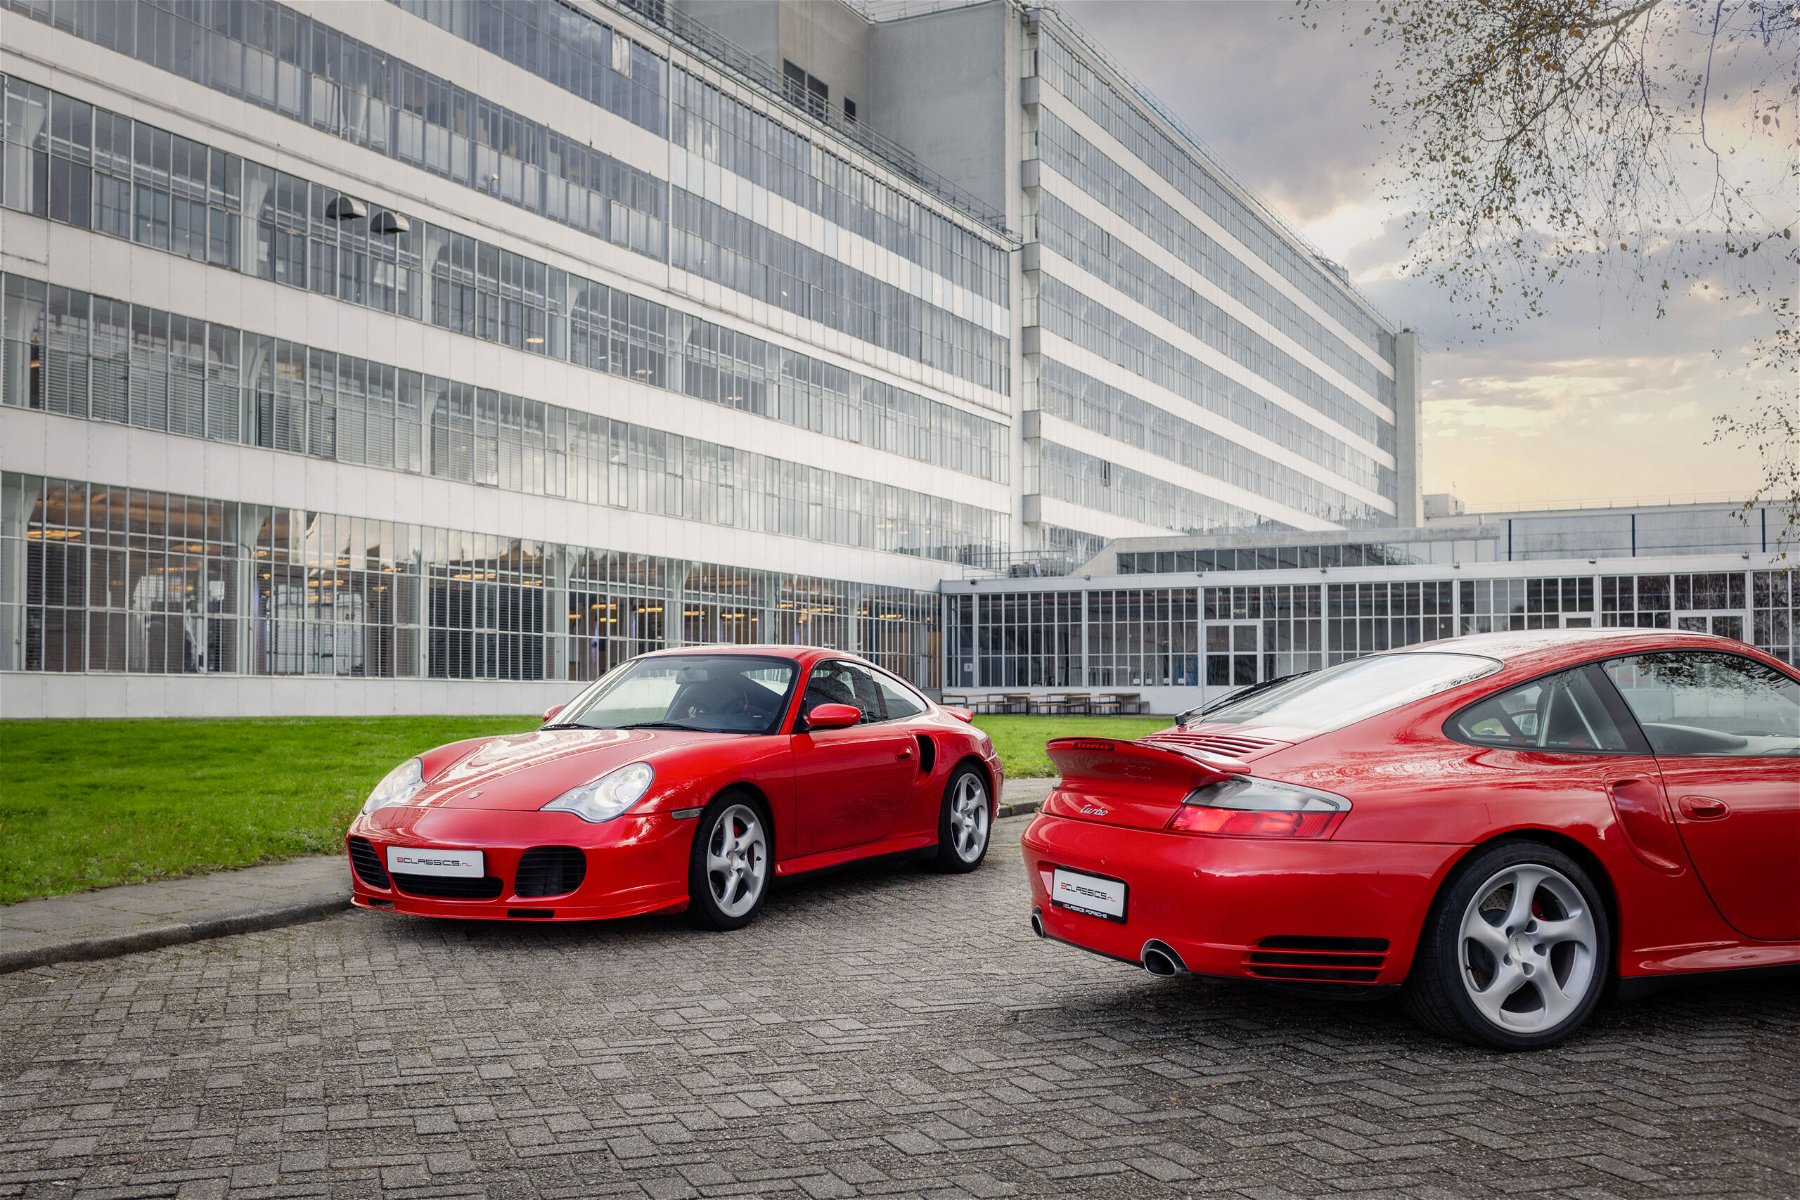 Two Porsche 996 Turbo in guards red